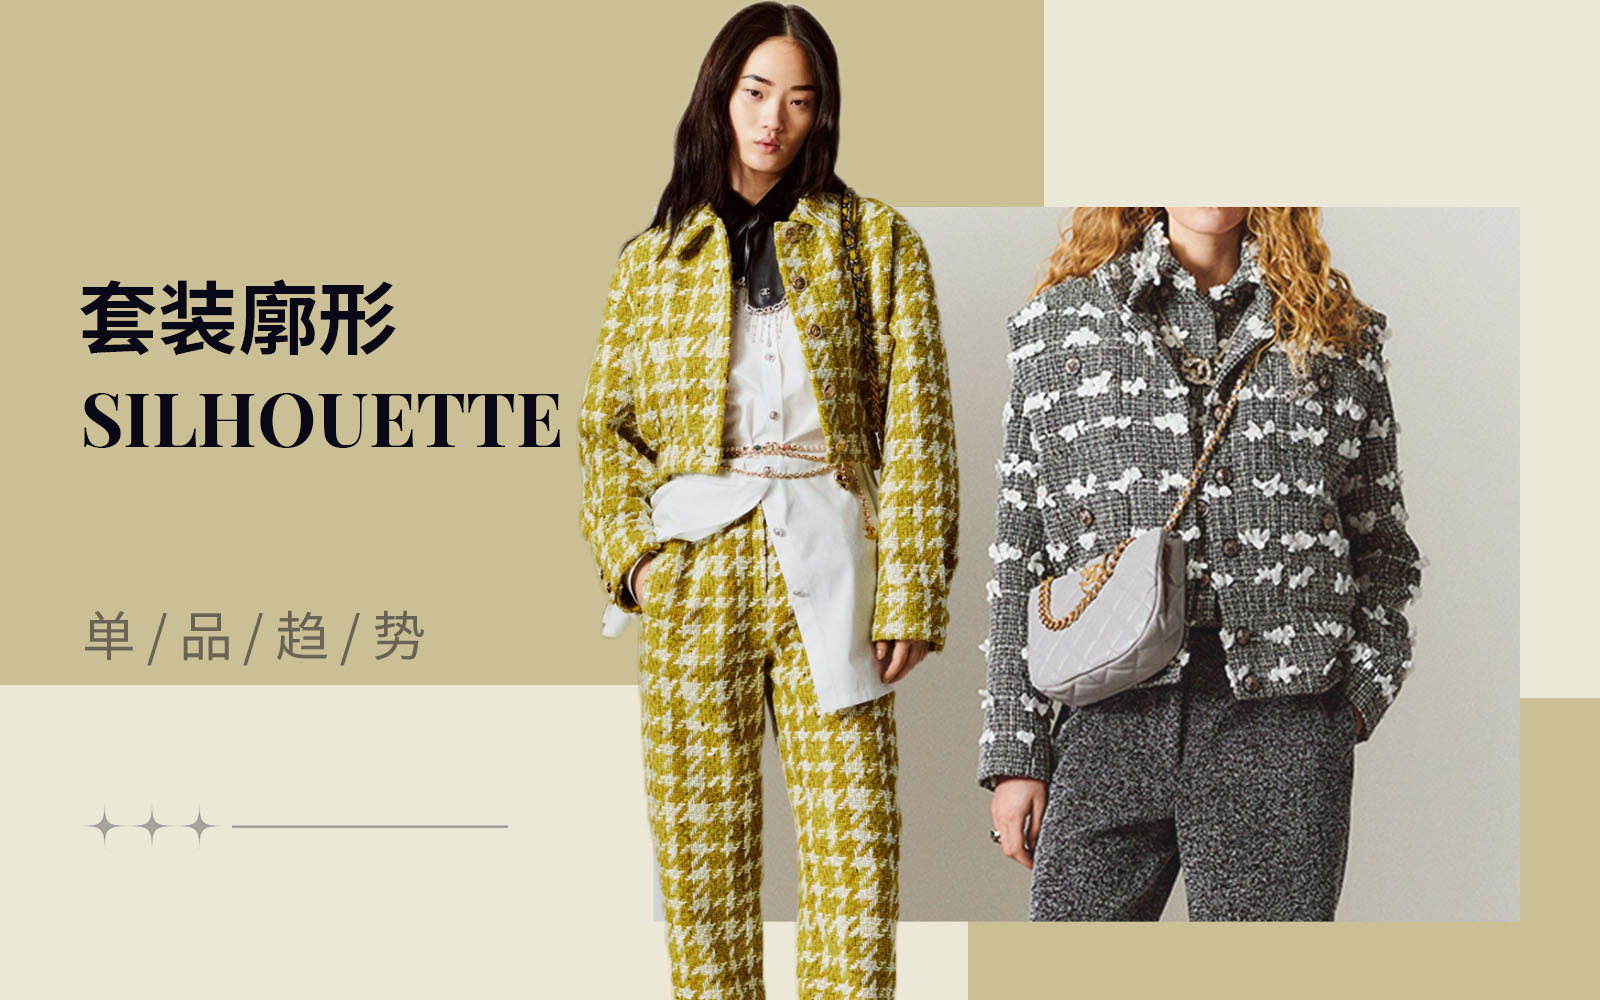 The Silhouette Trend for Women's Chanel Inspired Suit